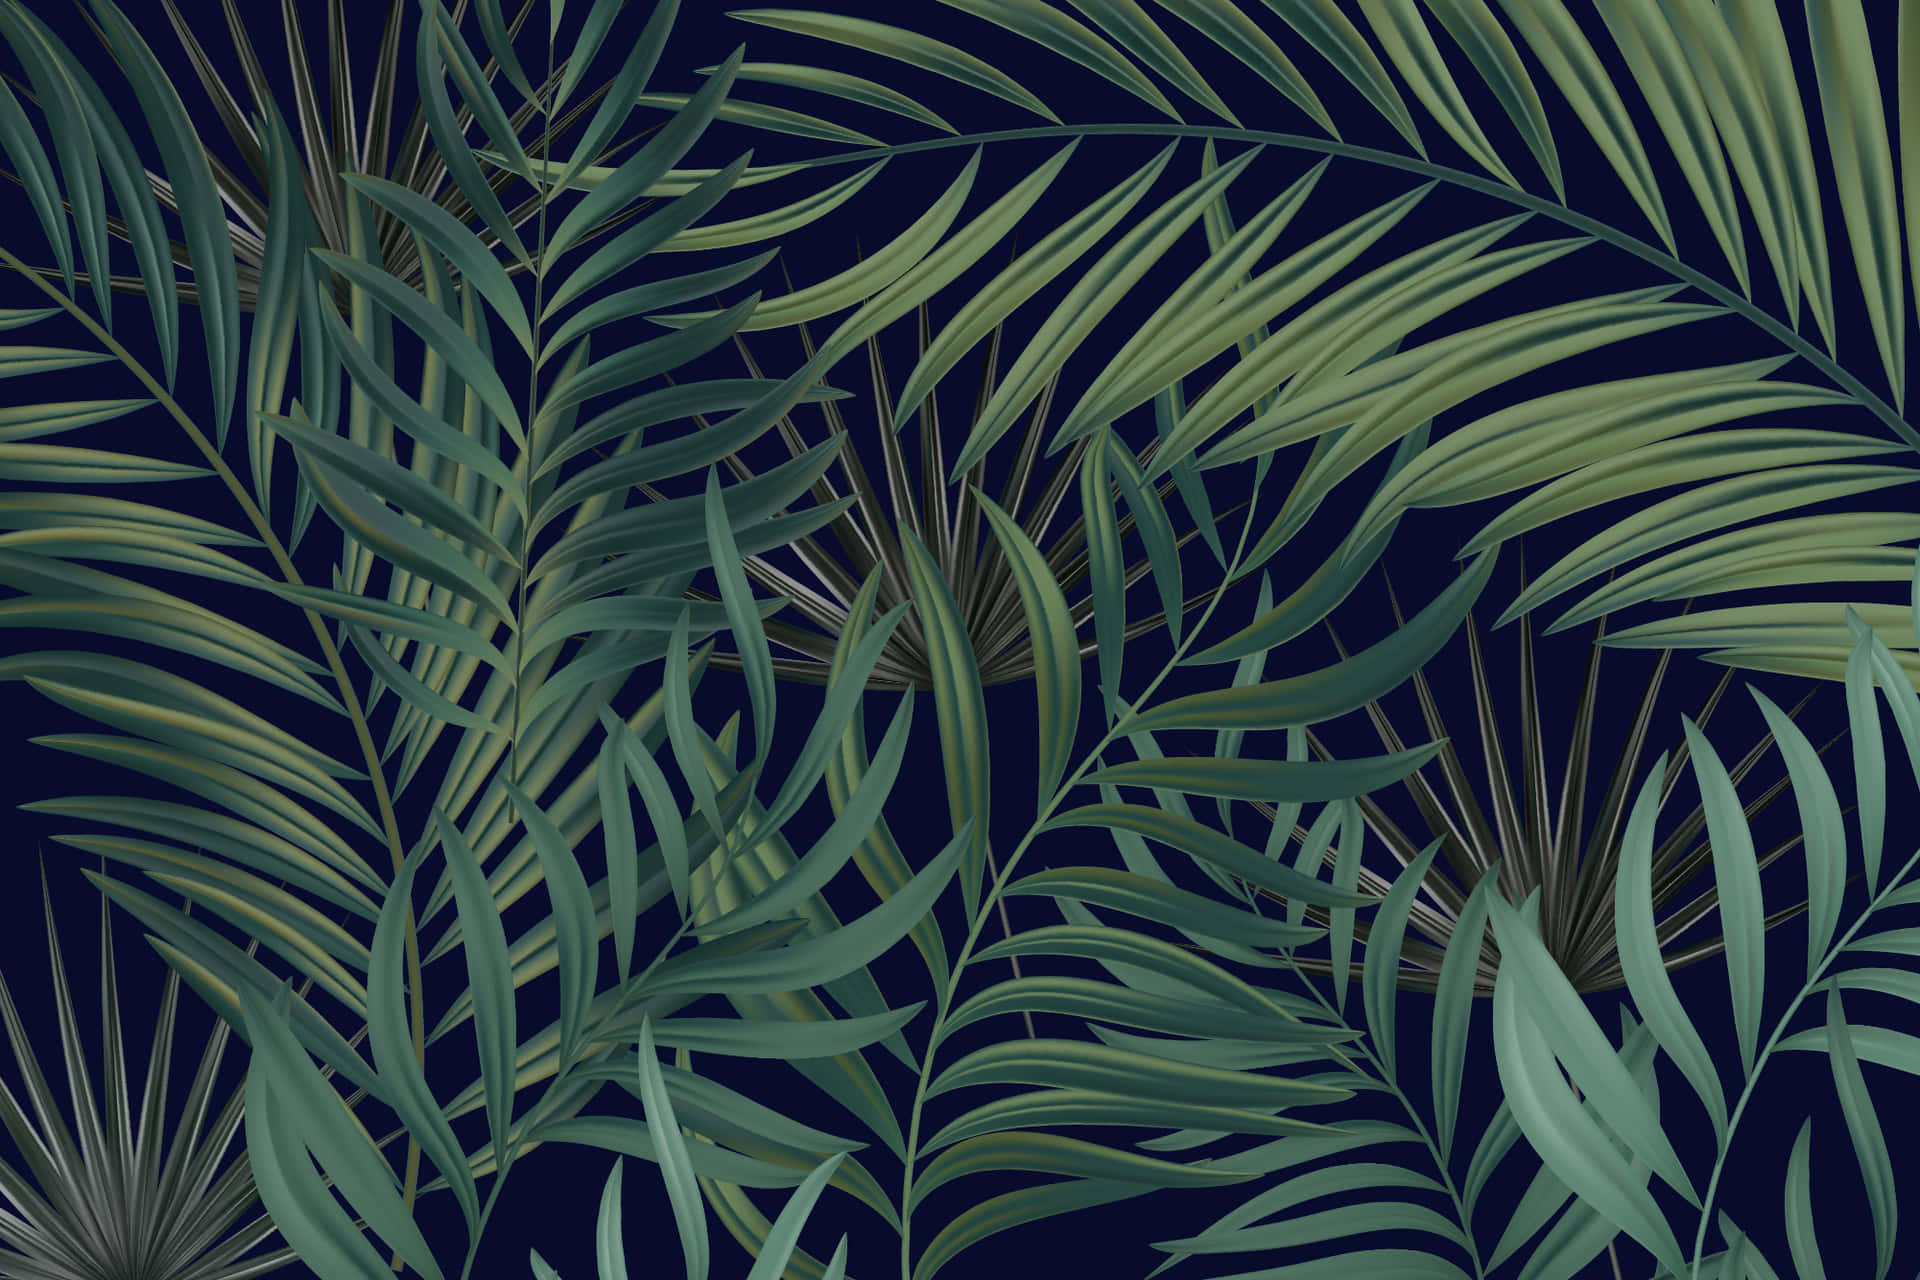 "A Stunning Close Up Of Lush Tropical Leaves"